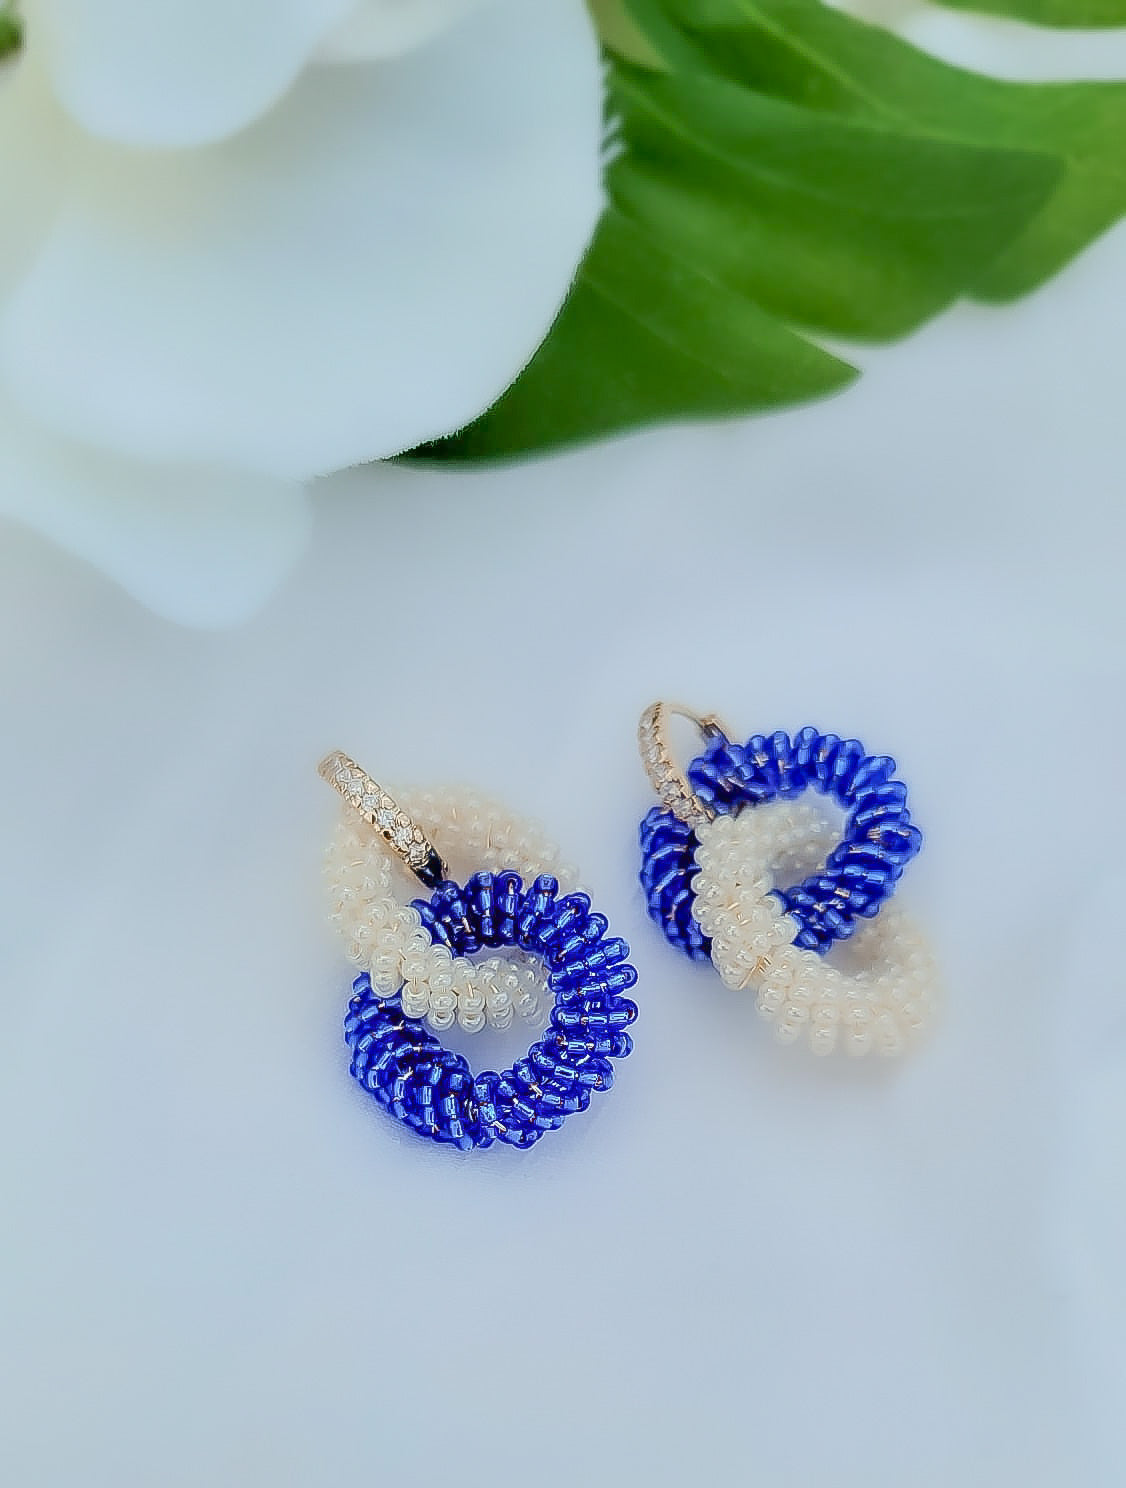 Infinity Earrings in Blue and White - Handcrafted with Japanese Miyuki Beads on Stainless Steel Hoops